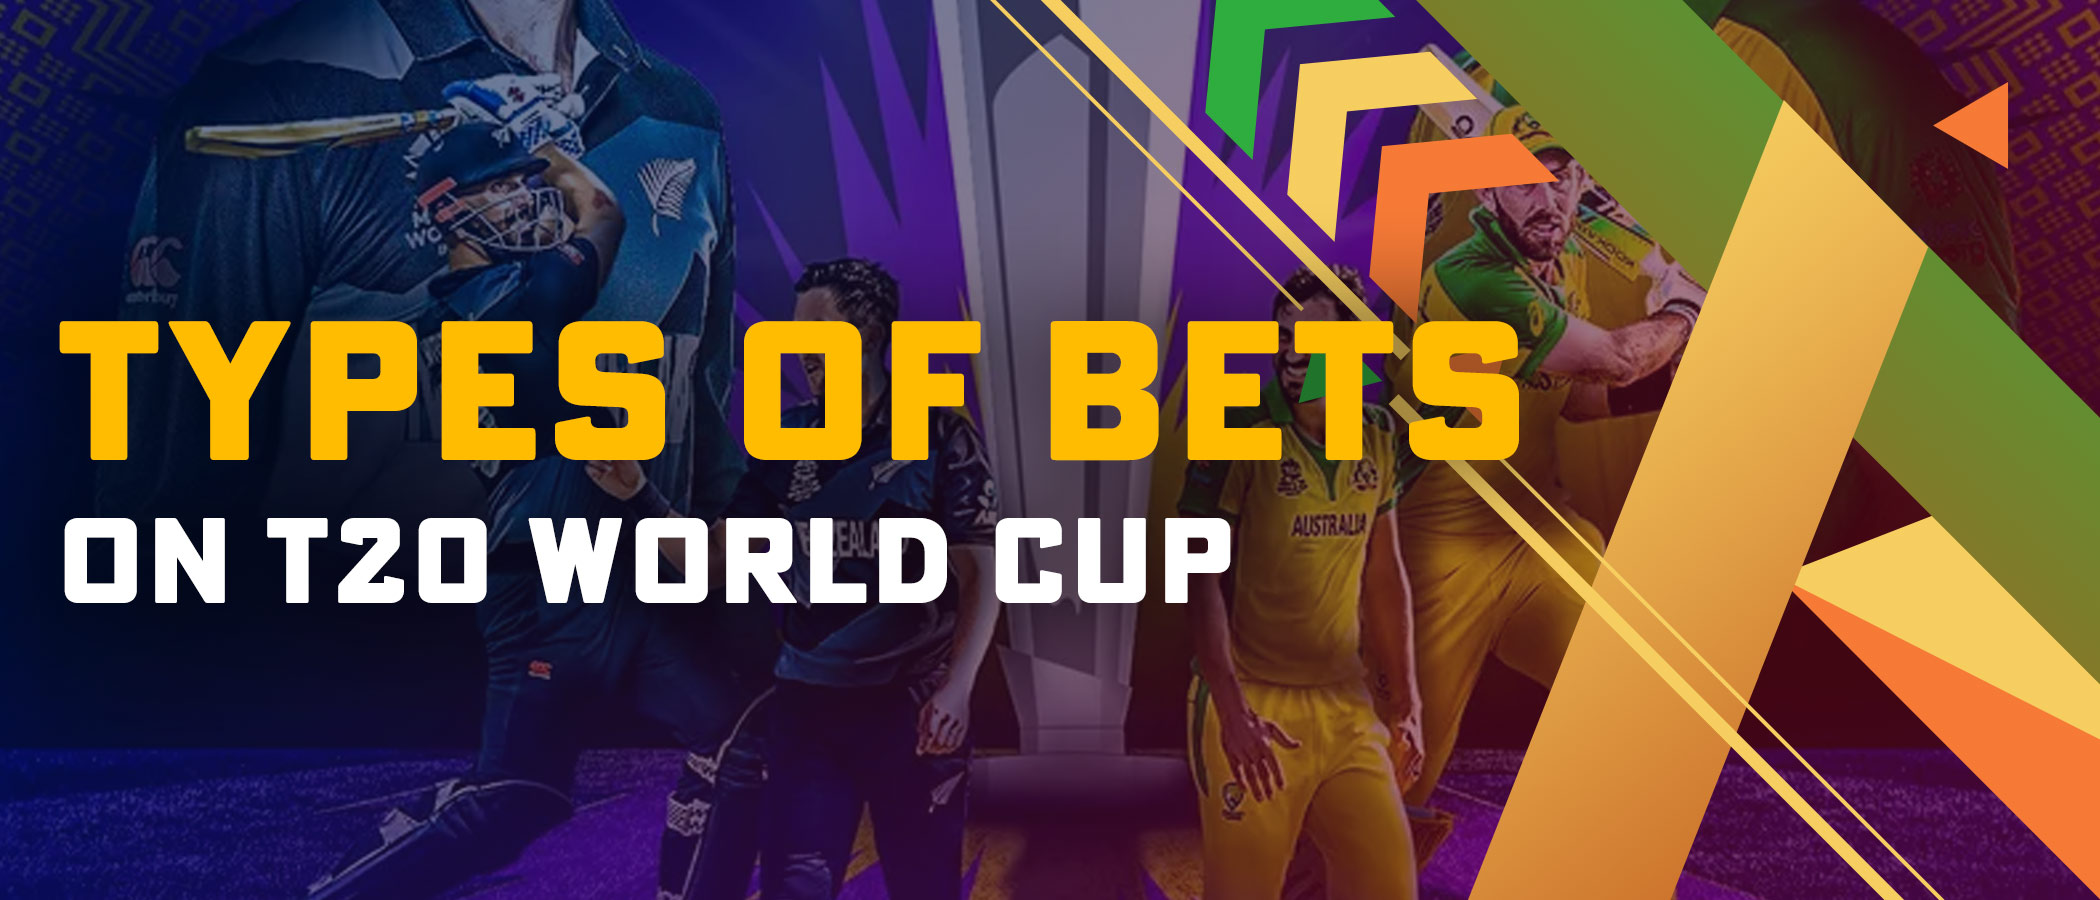 Types of bets on t20 world cup events